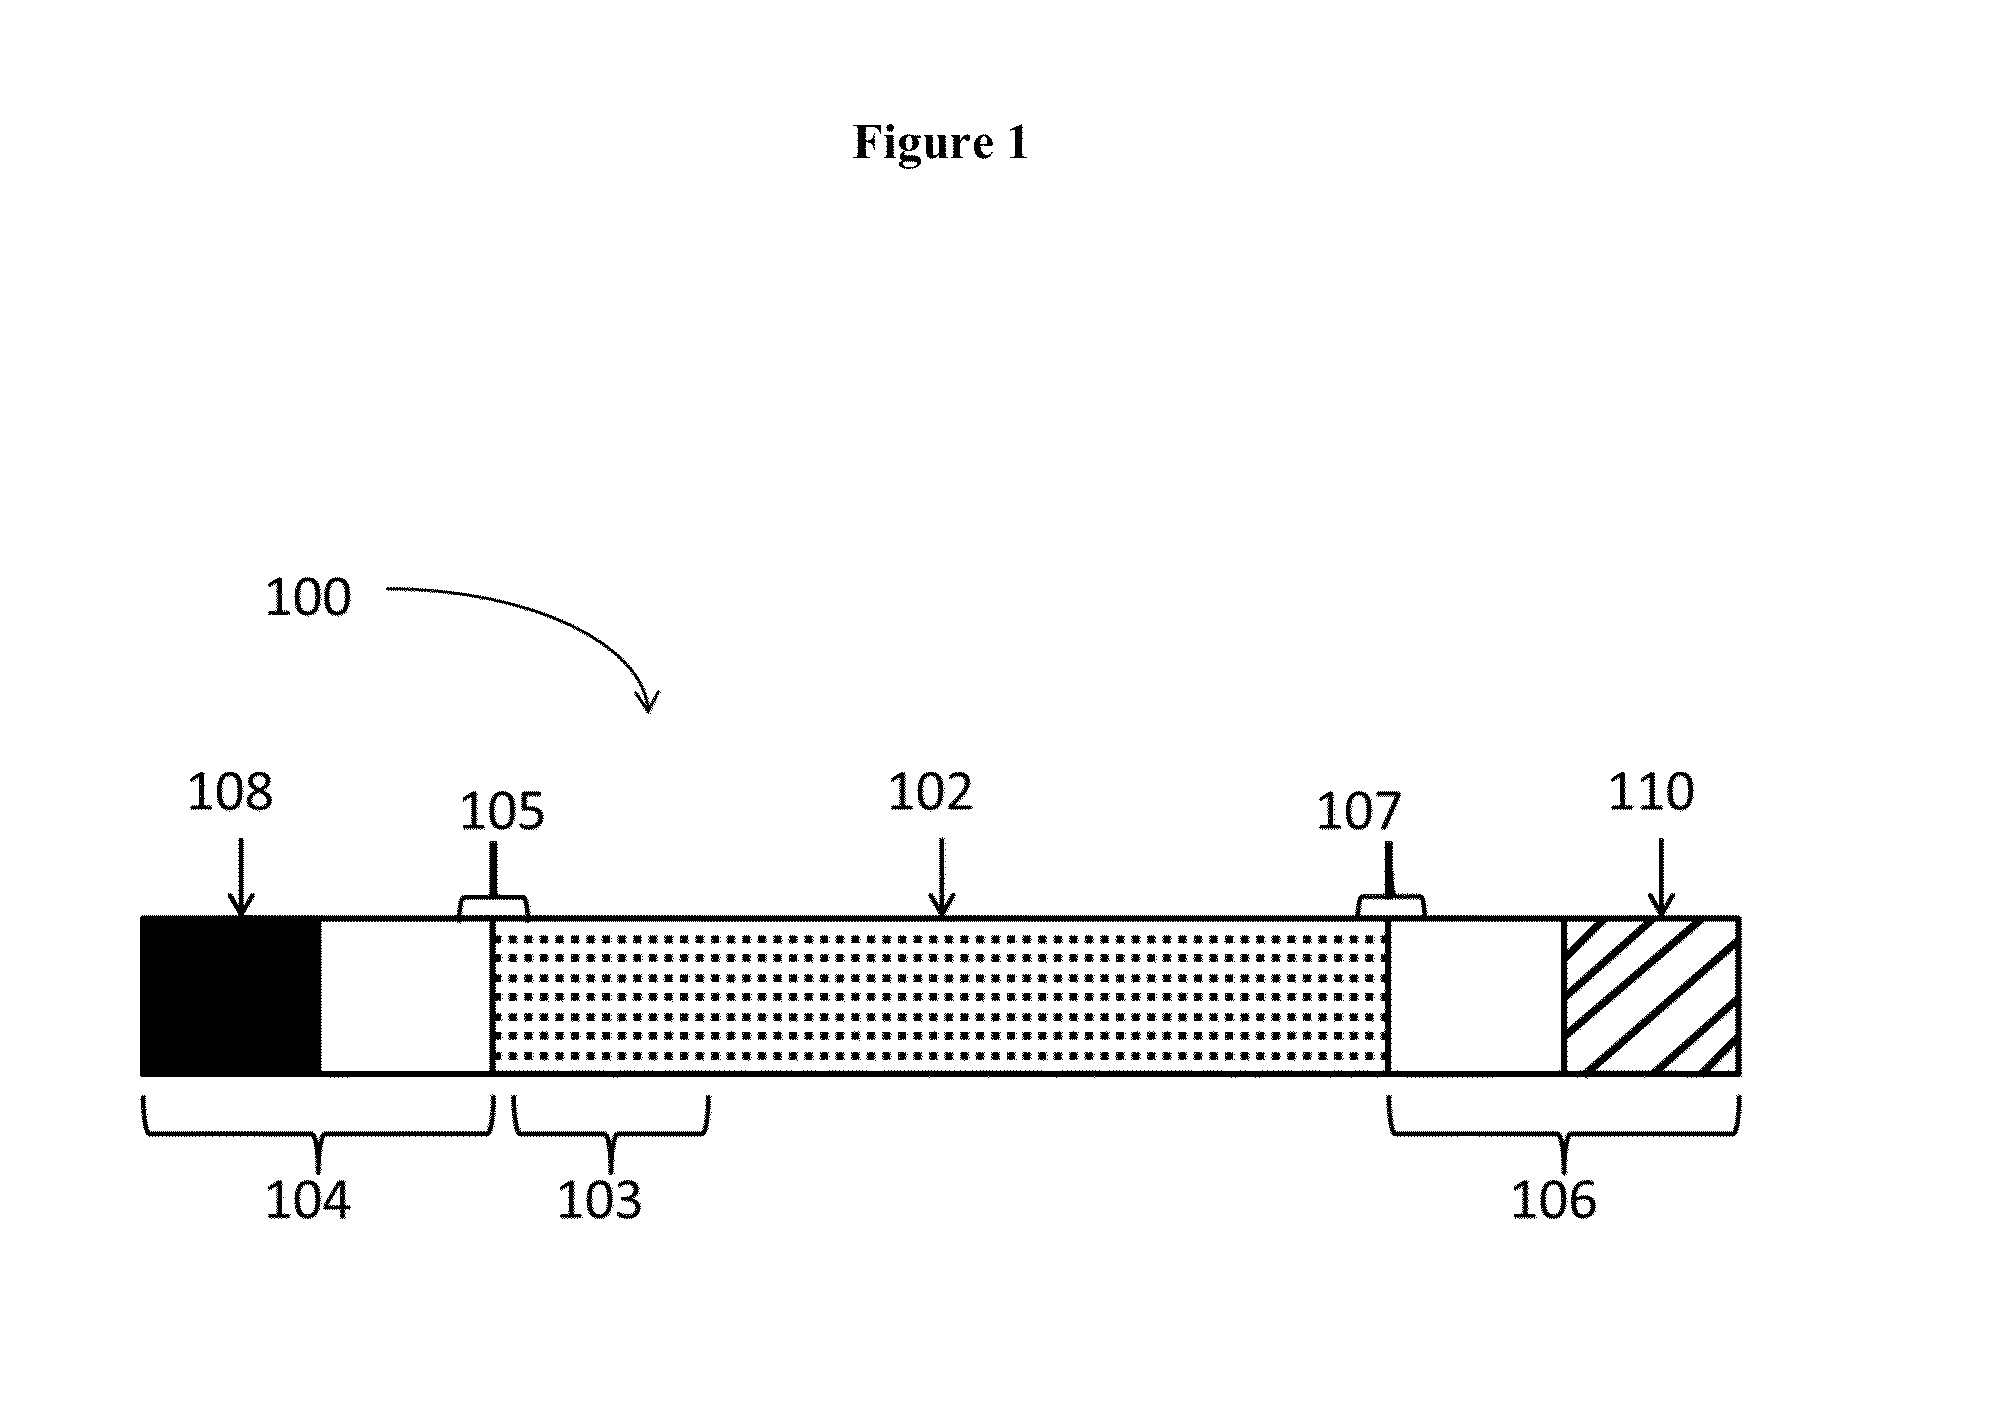 Compositions and methods of altering cholesterol levels